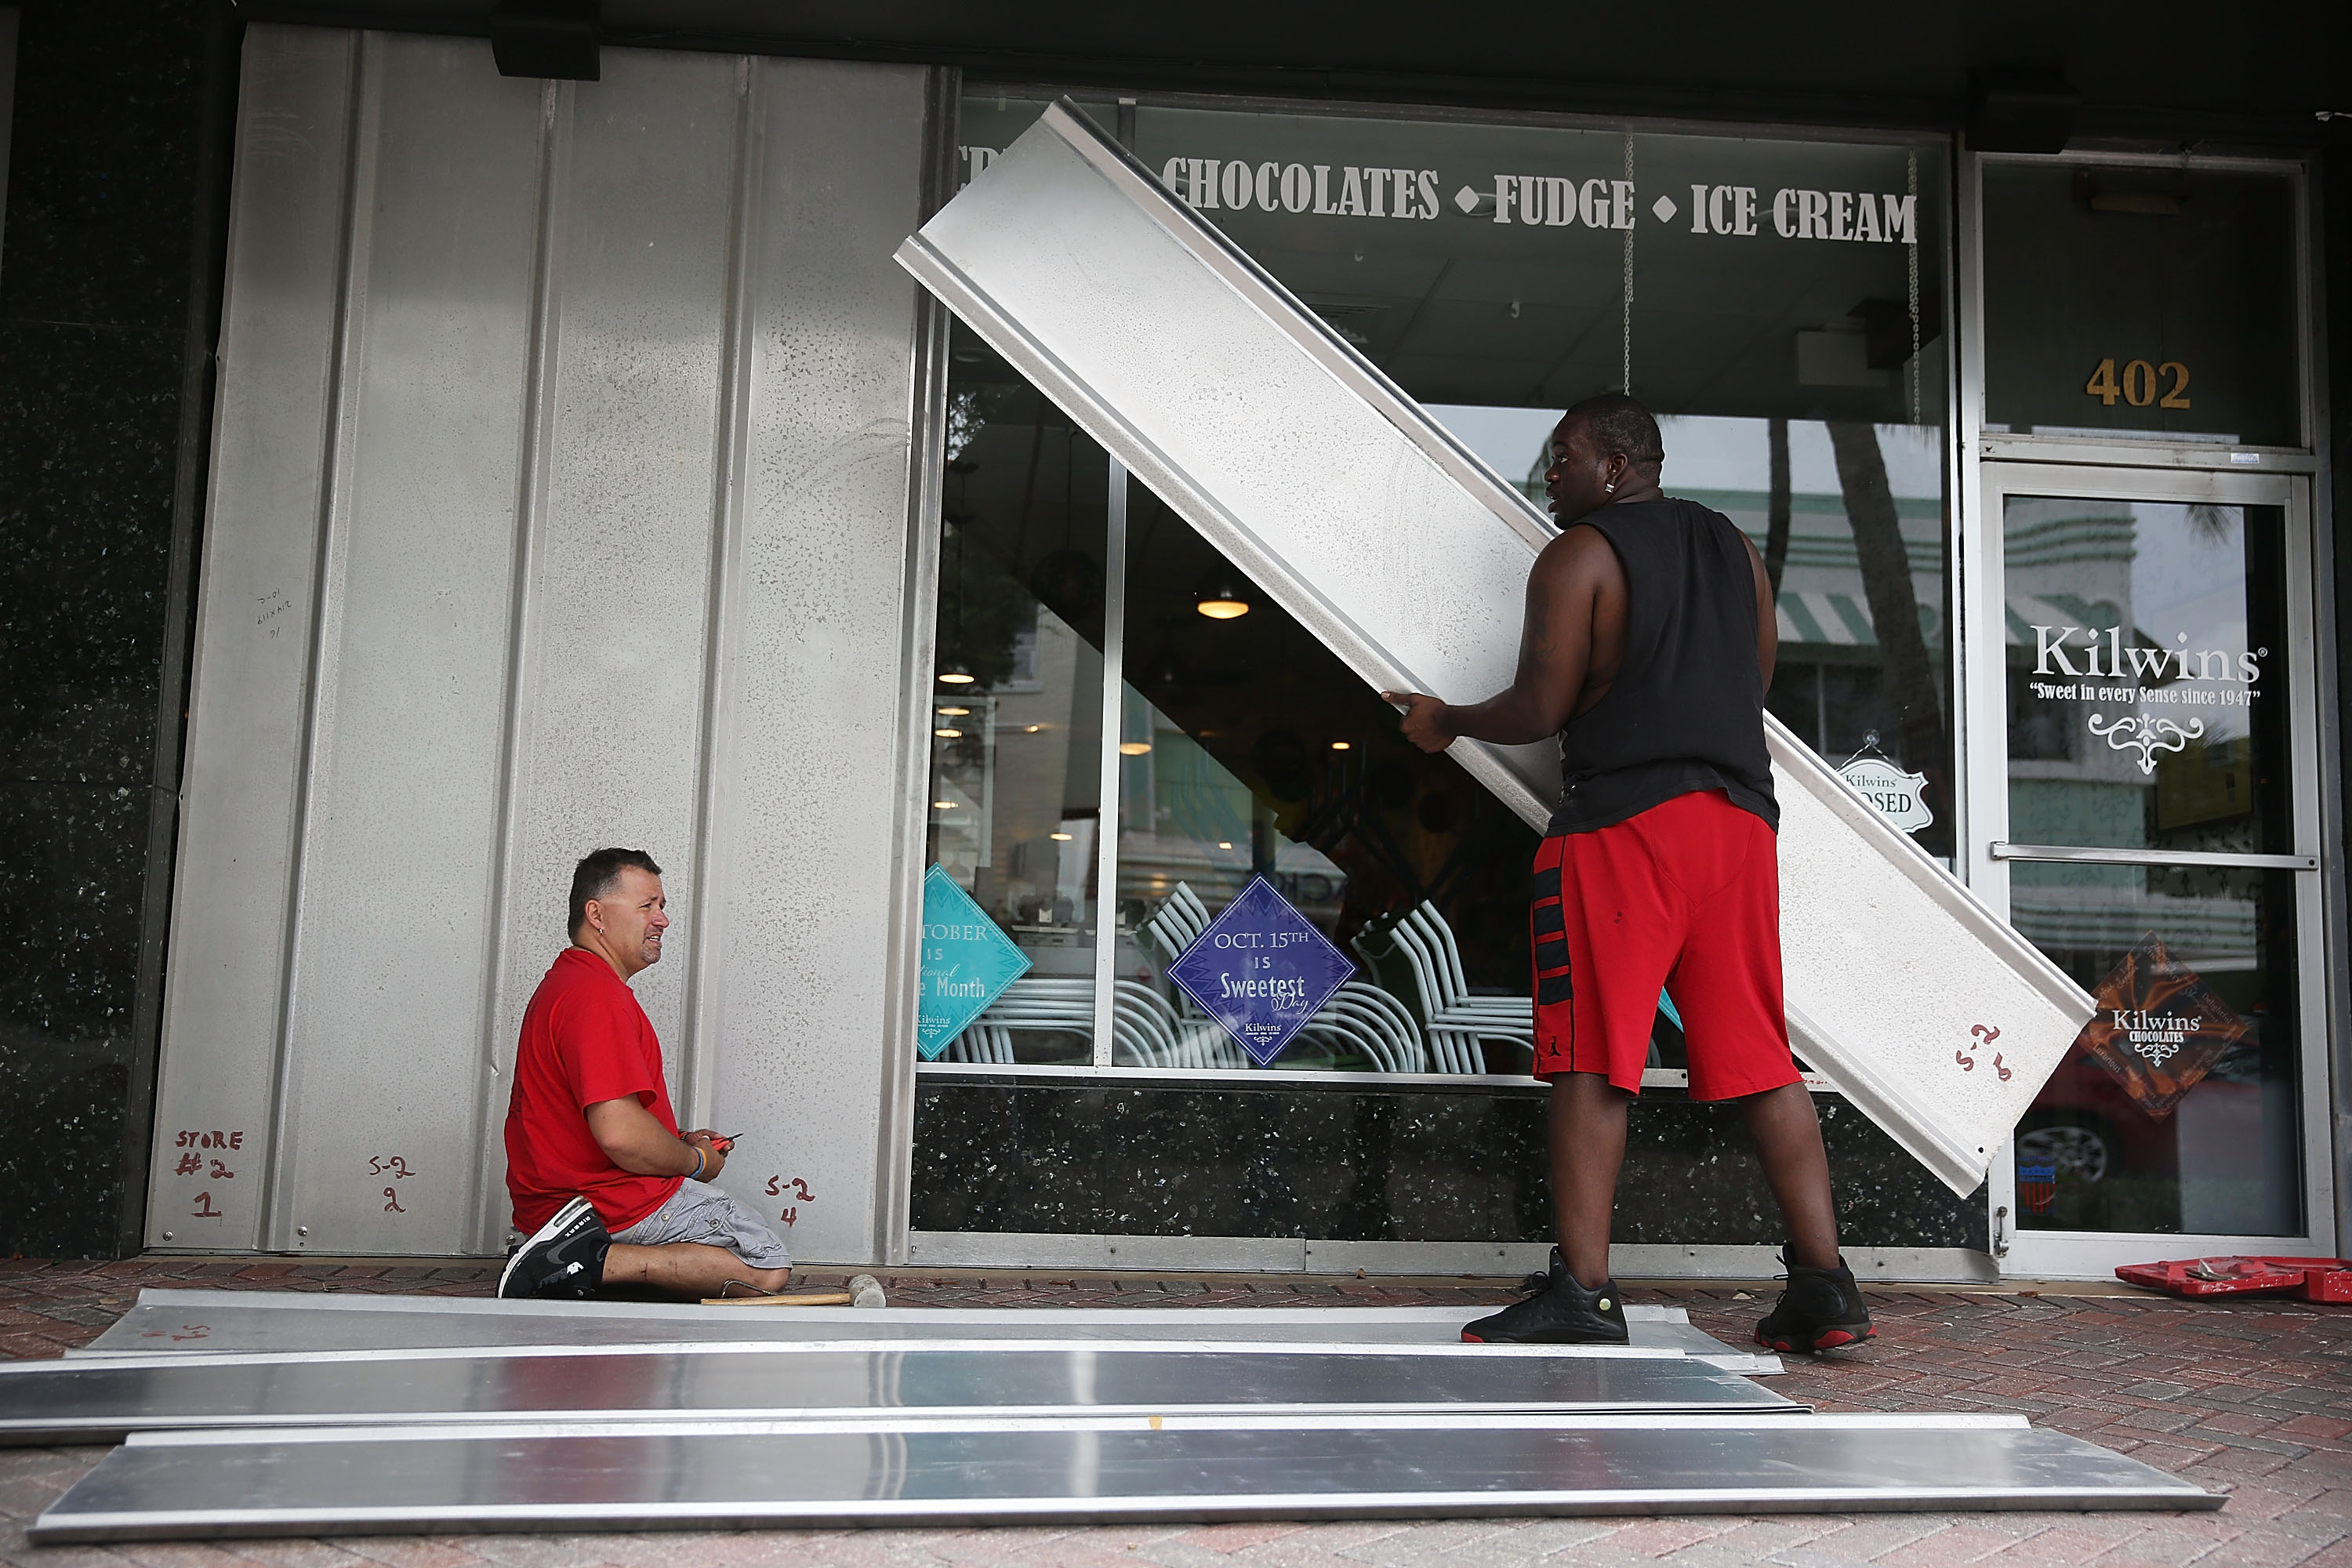 Jason Brock and Kevin Hunter put up hurricane shutters in front of a business as Hurricane Matthew approaches the area on October 6, 2016 in Delray Beach, Florida. (Getty)